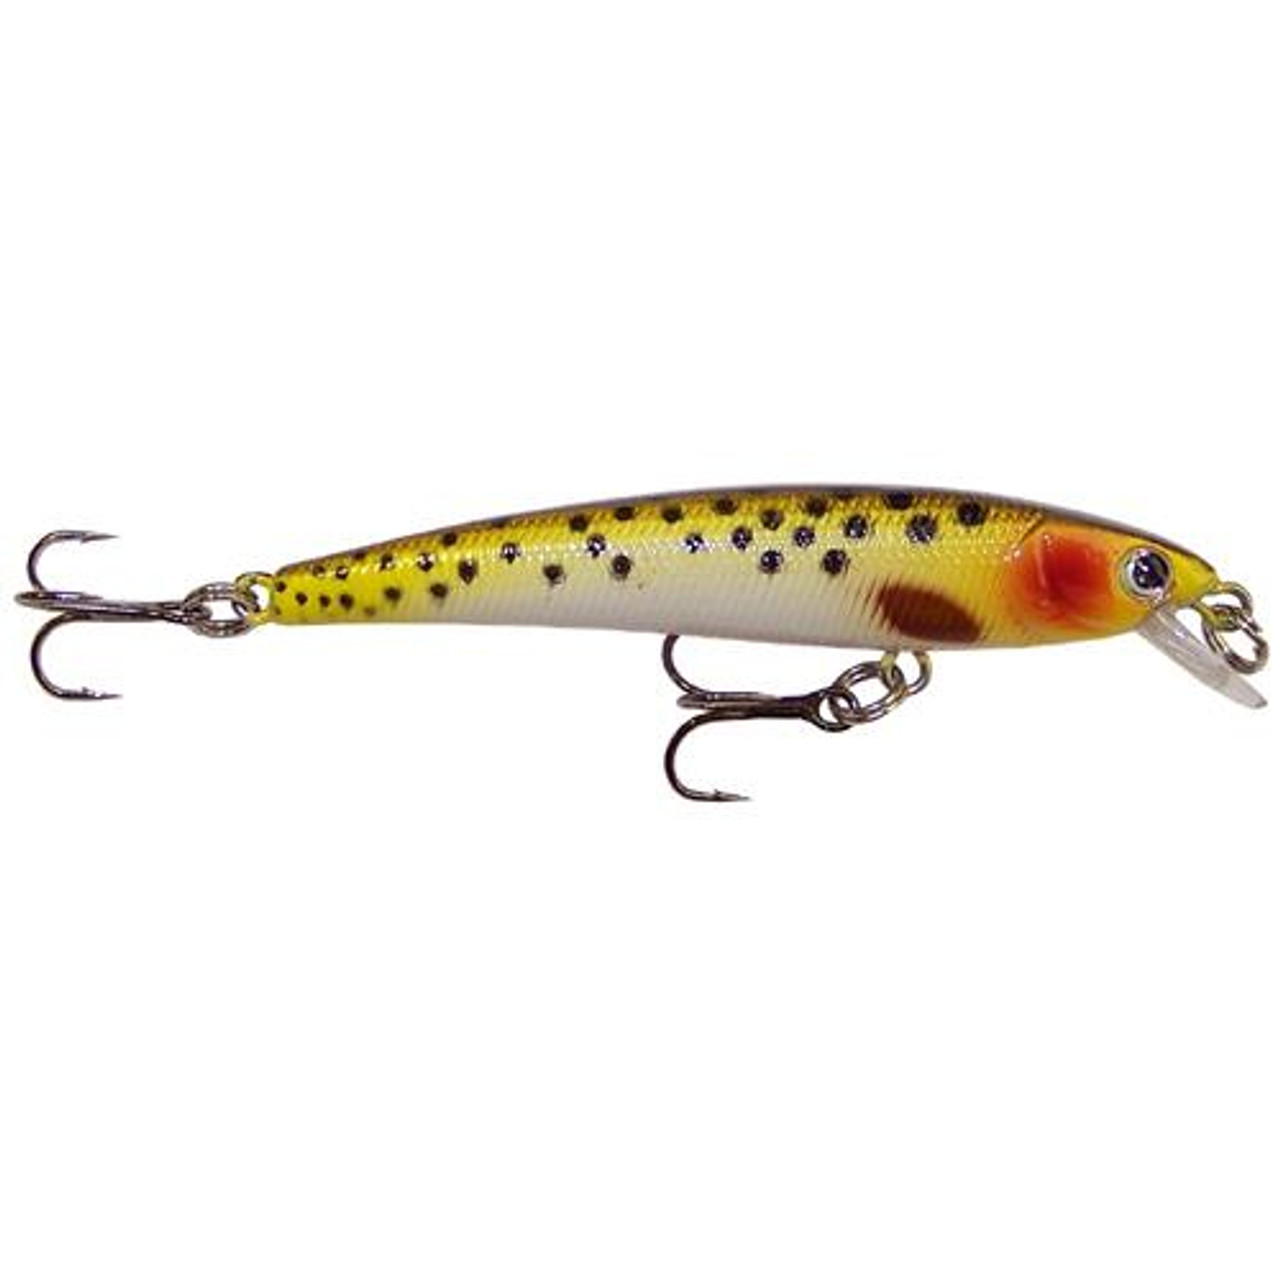 Leland's Lures Trout Magnet 50-Pack Split-Tail Grub Body Pack, Also Great  for Bass and Panfish, Cotton Candy, Soft Plastic Lures -  Canada